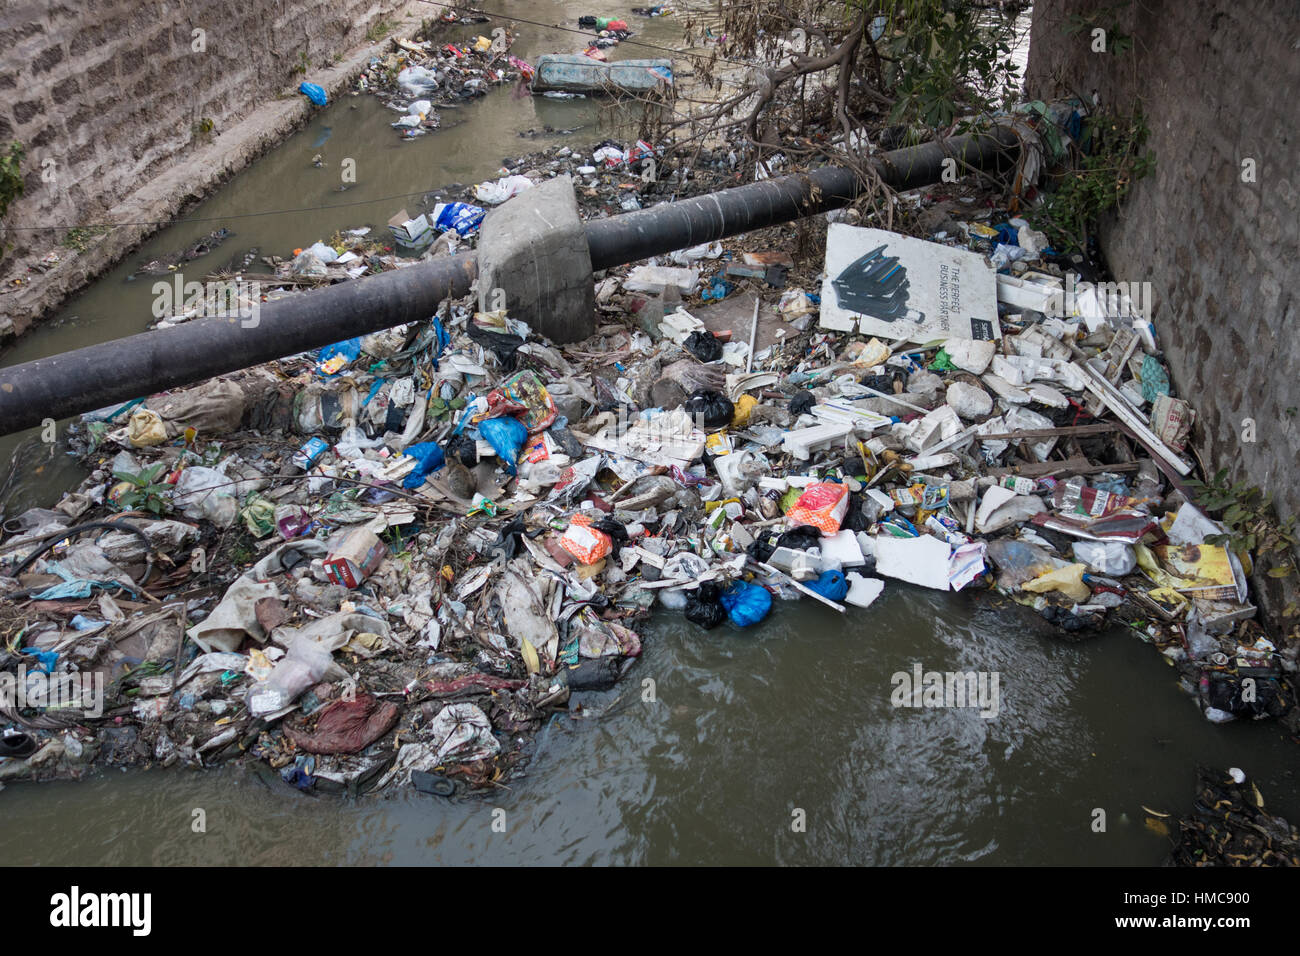 HYDERABAD, INDIA - FEBRUARY 02,2017  Sewage canal clogged by floating waste in Hyderabad,India Stock Photo